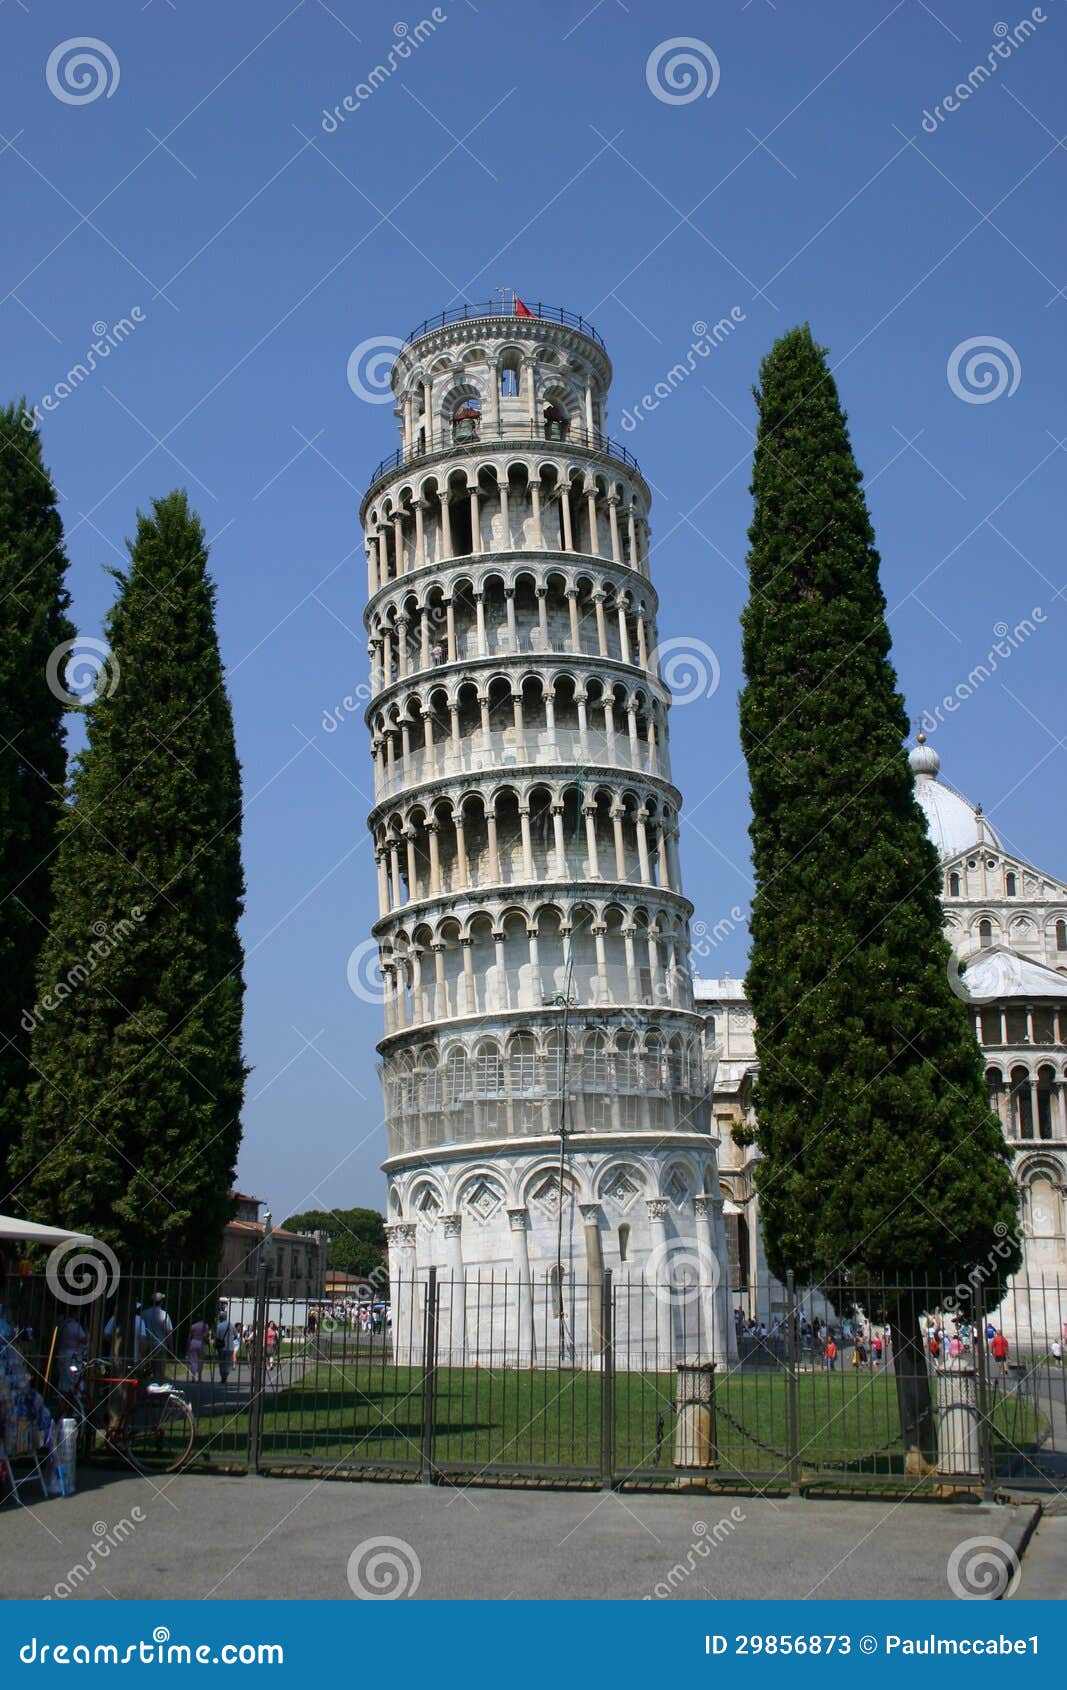 leaning tower pizza leaning tower pisa